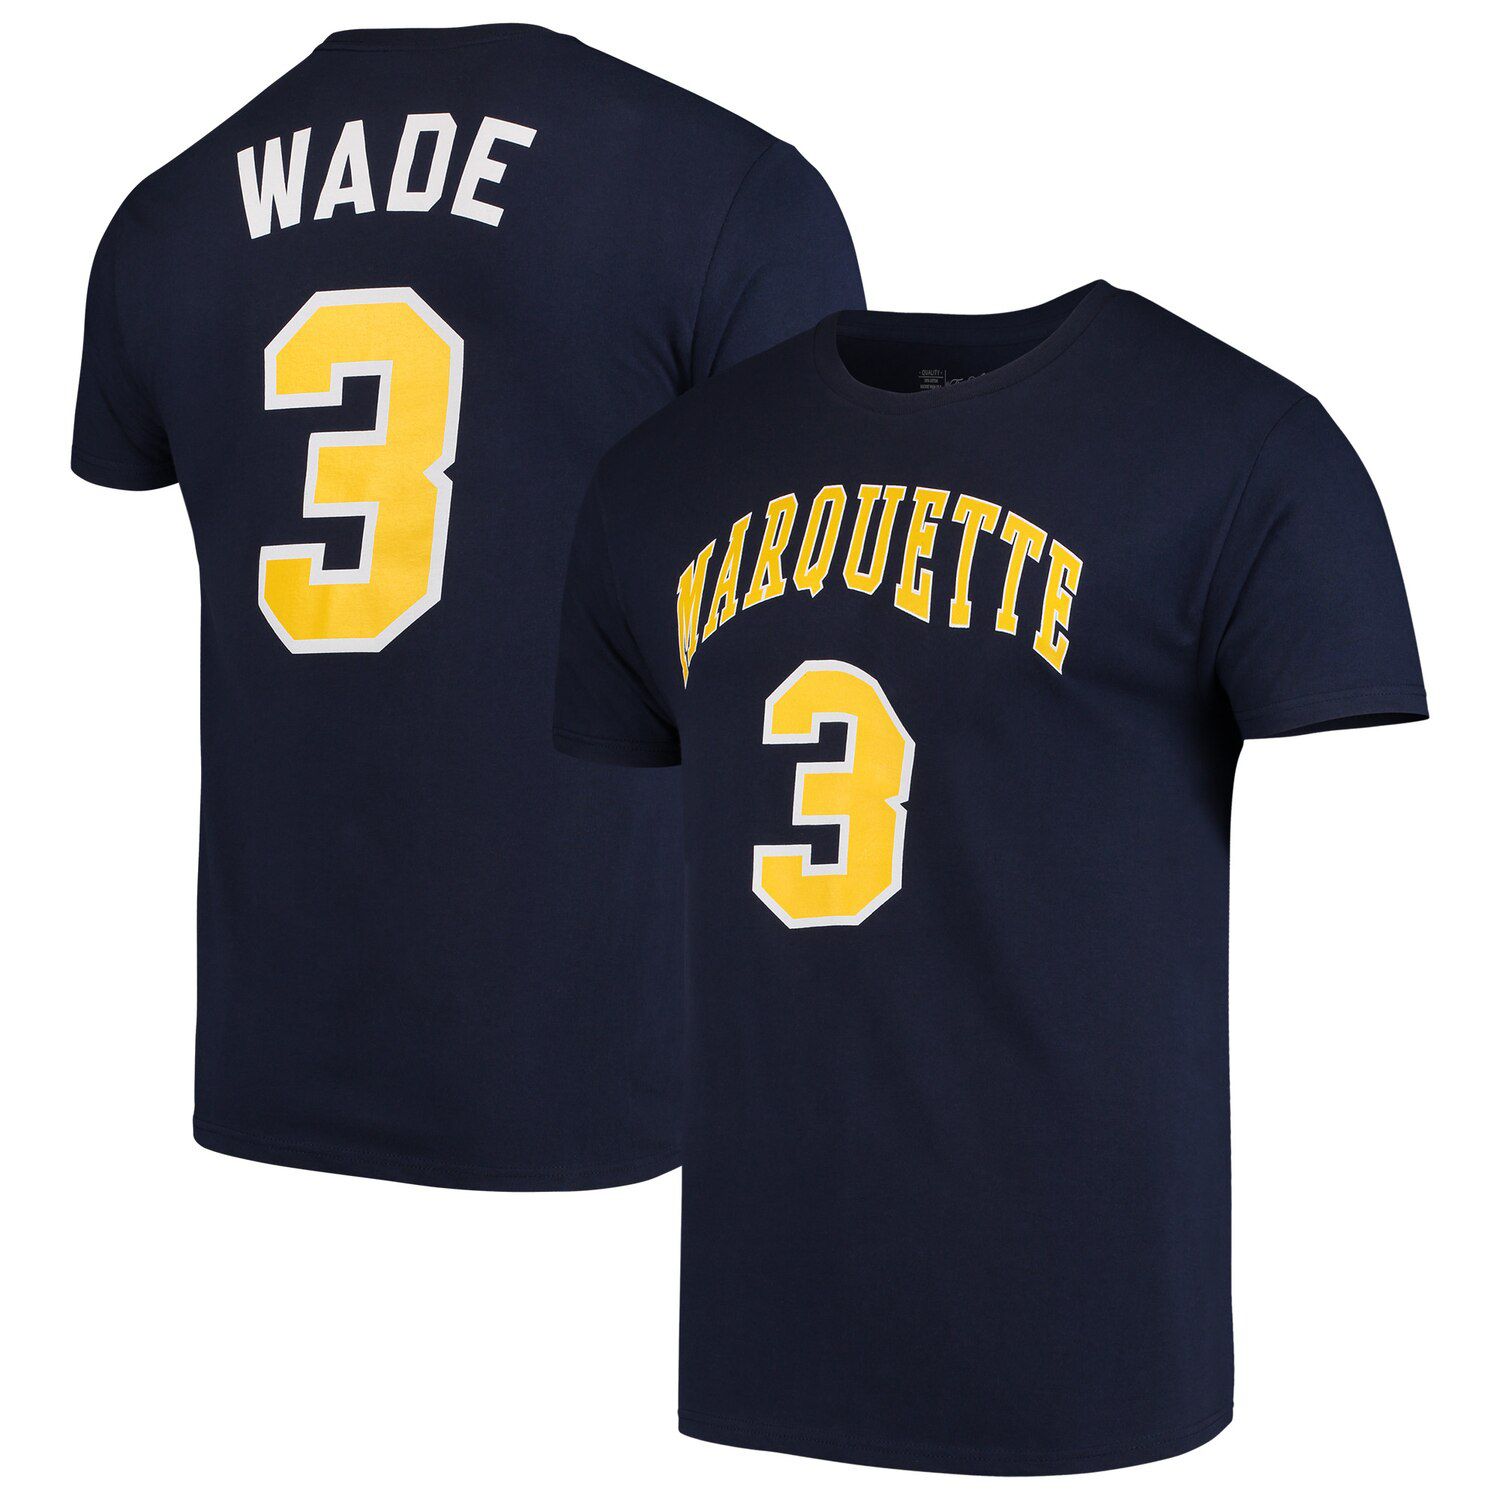 marquette basketball jersey